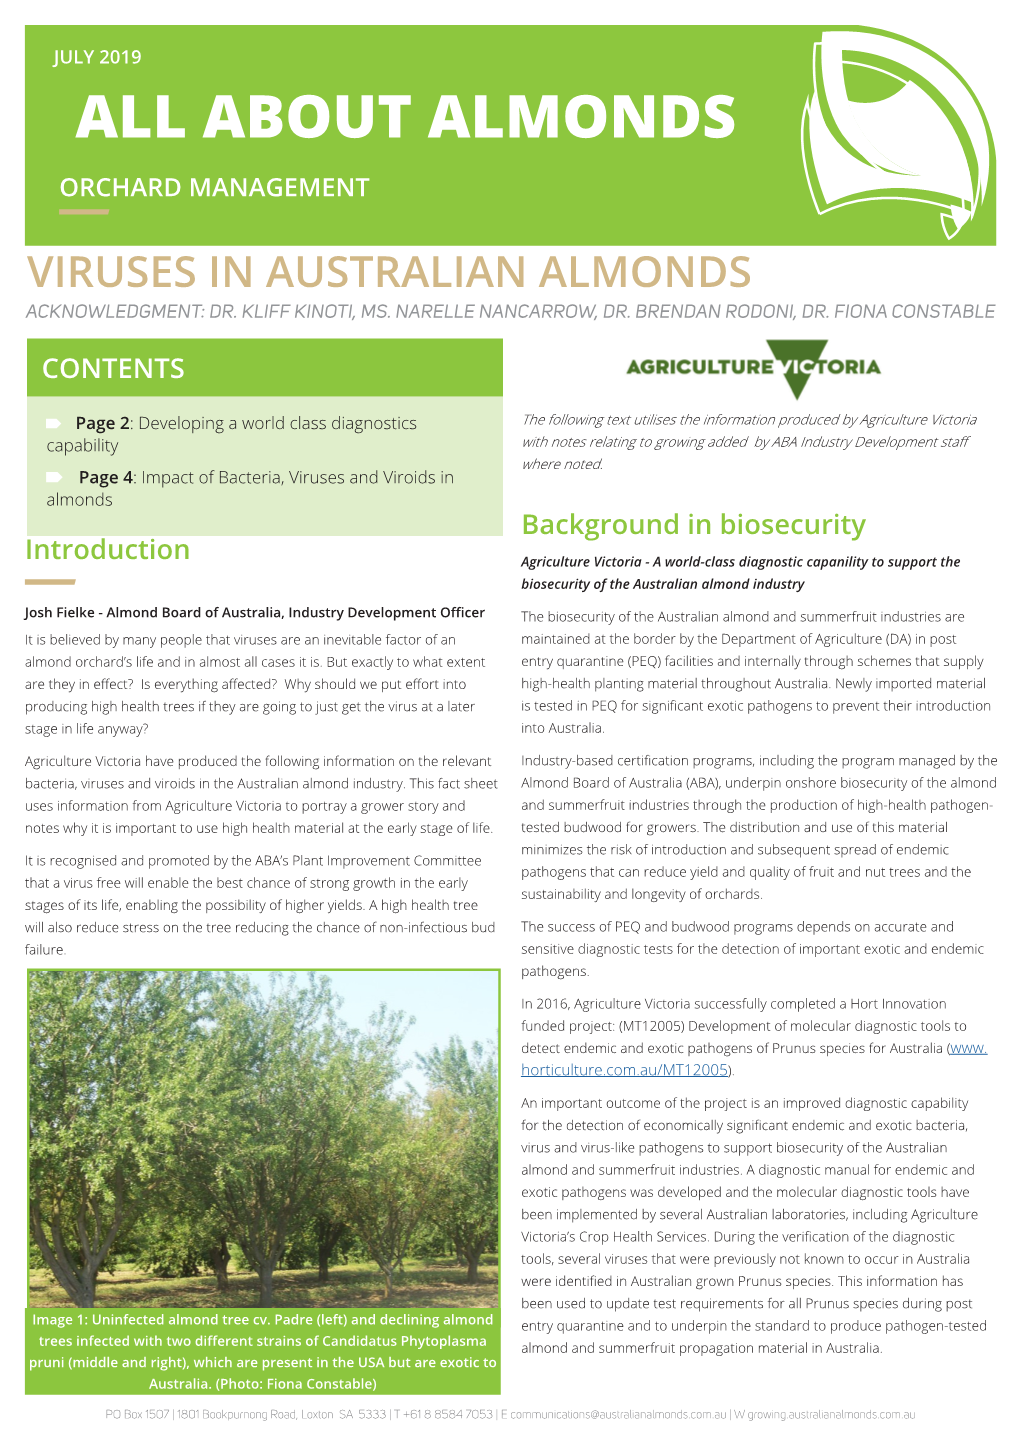 All About Almonds Orchard Management